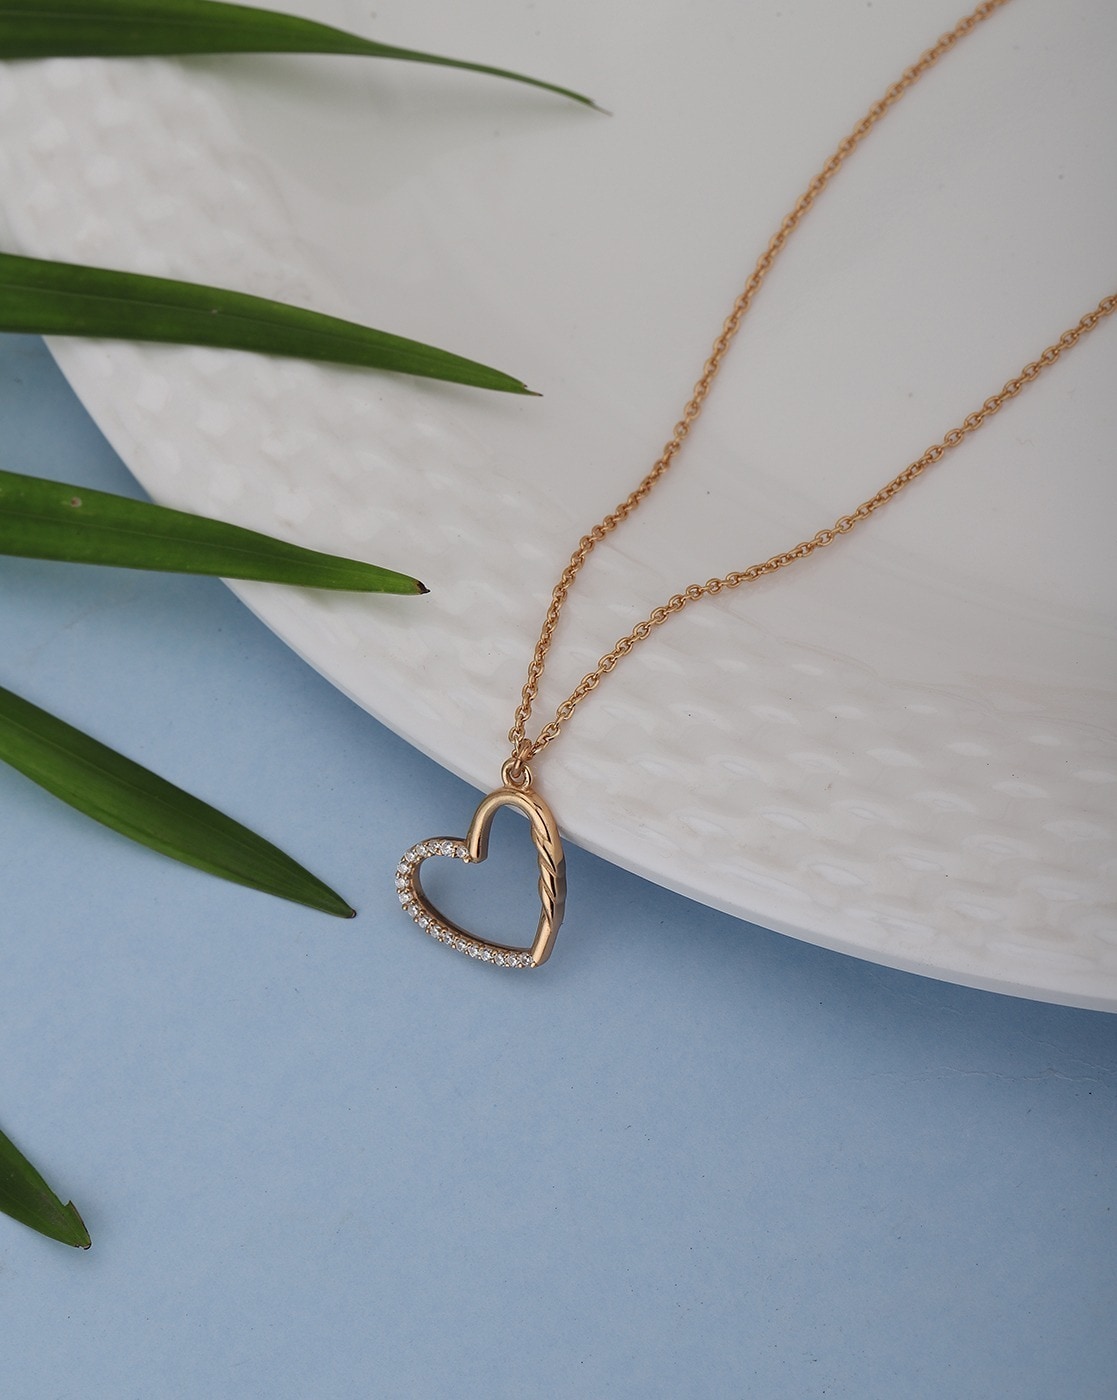 Gold Plated Sterling Silver Heart Pendant Necklace - Lovisa